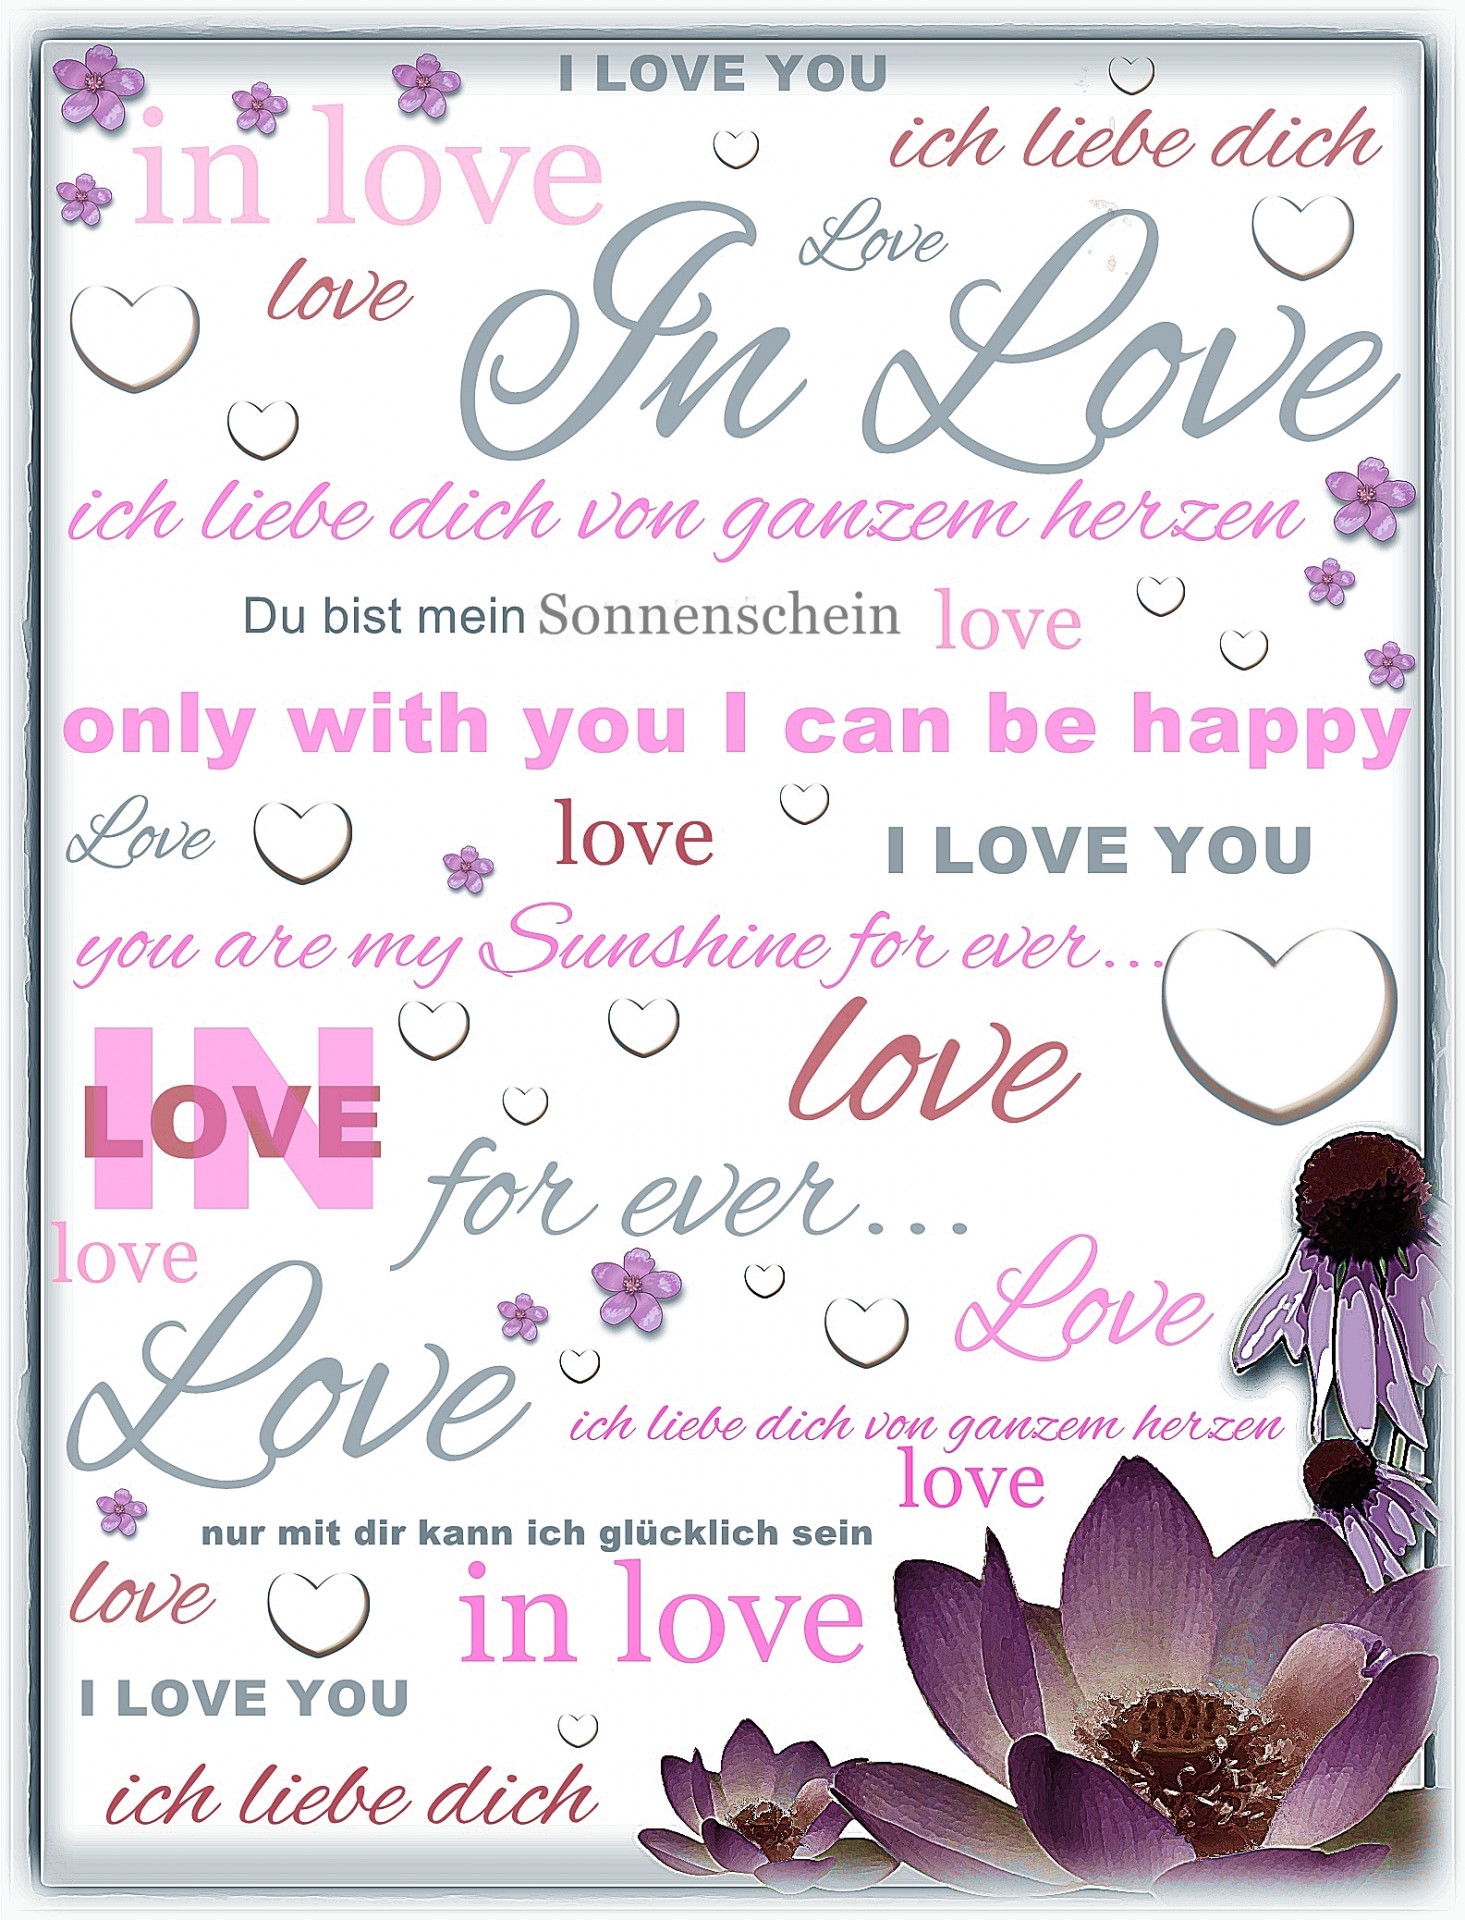 background love letter message free photo